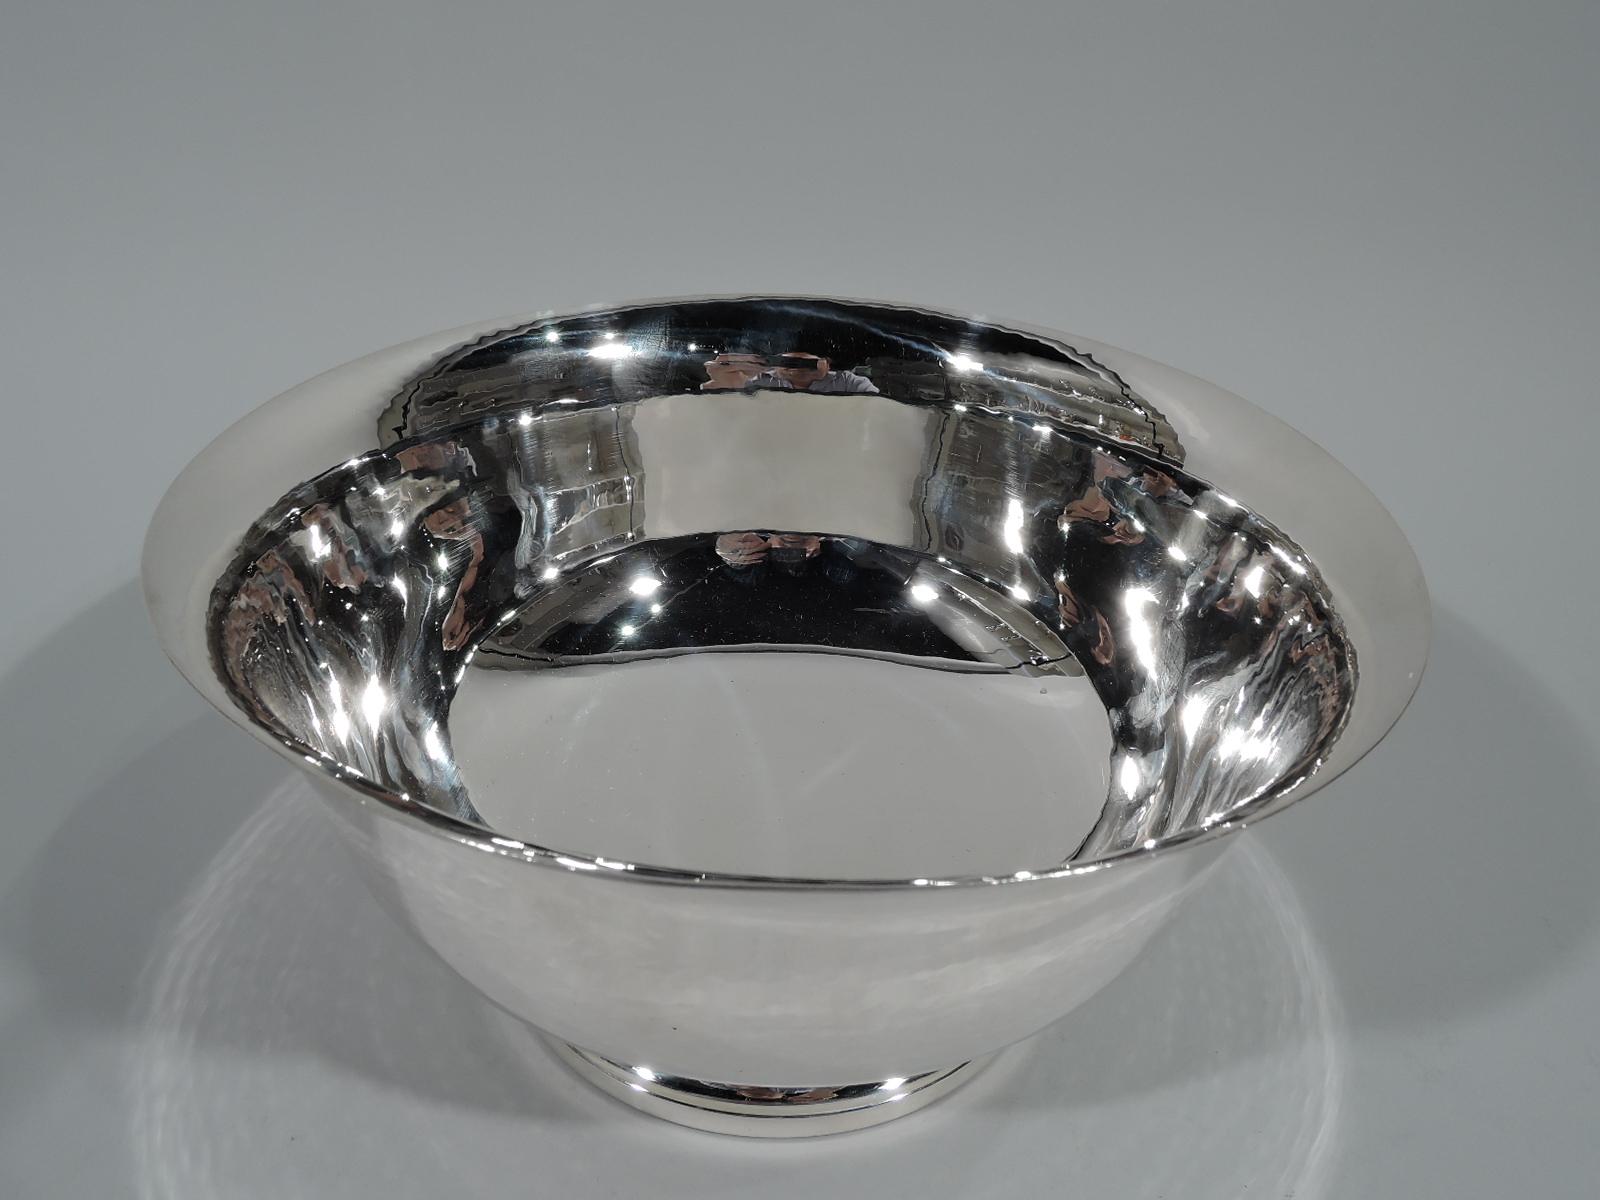 Colonial Revival Georg Jensen USA Hand-Hammered Sterling Silver Revere Bowl